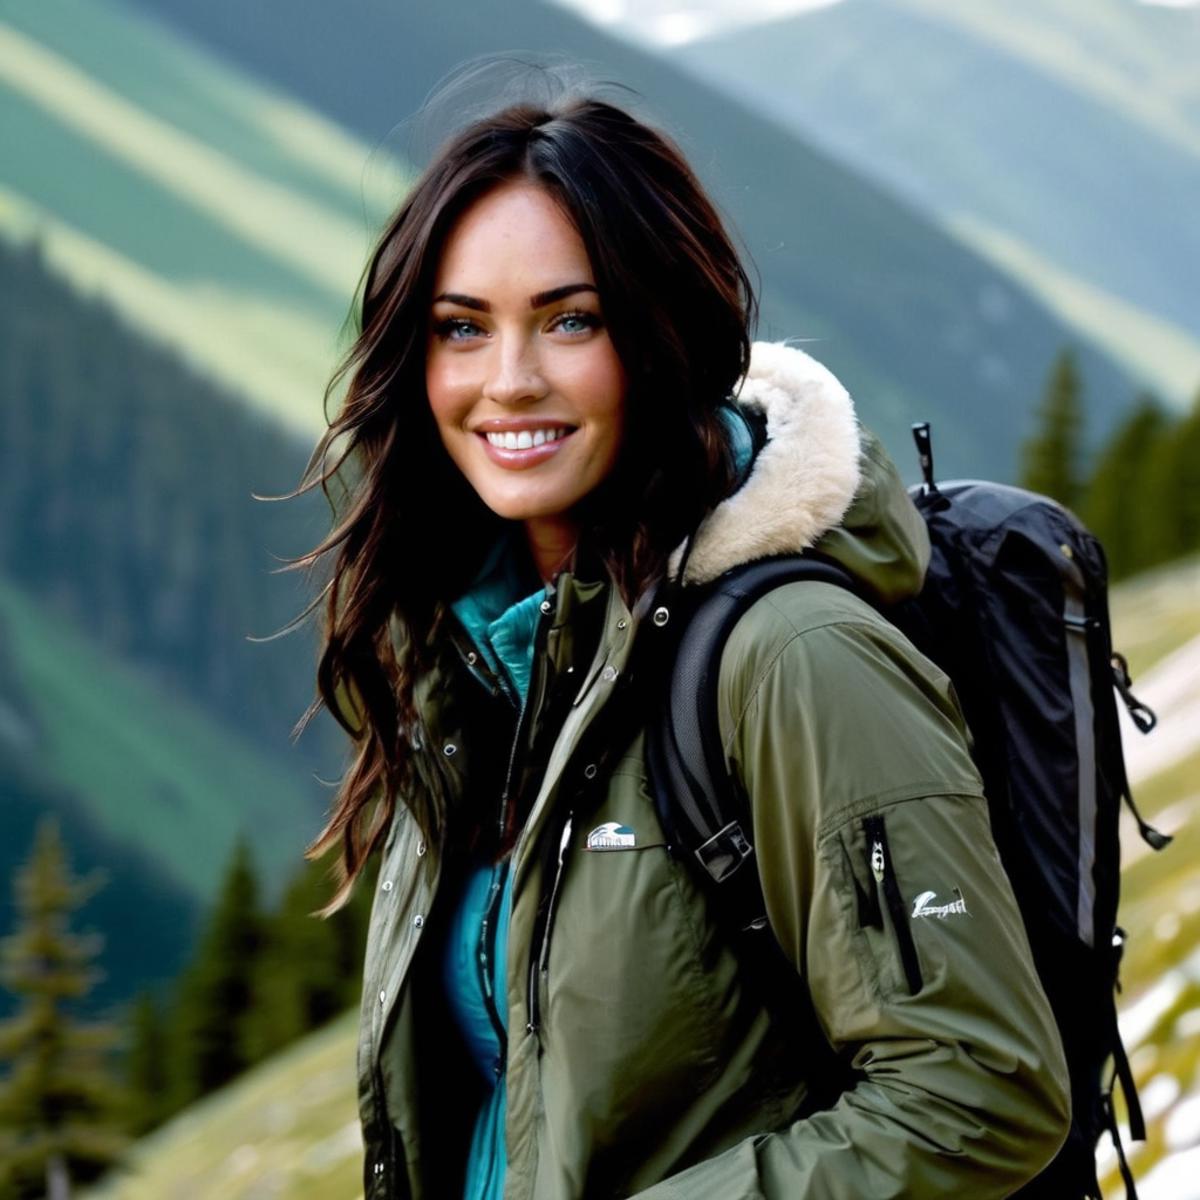 A woman wearing a backpack and a green jacket standing on a hillside.